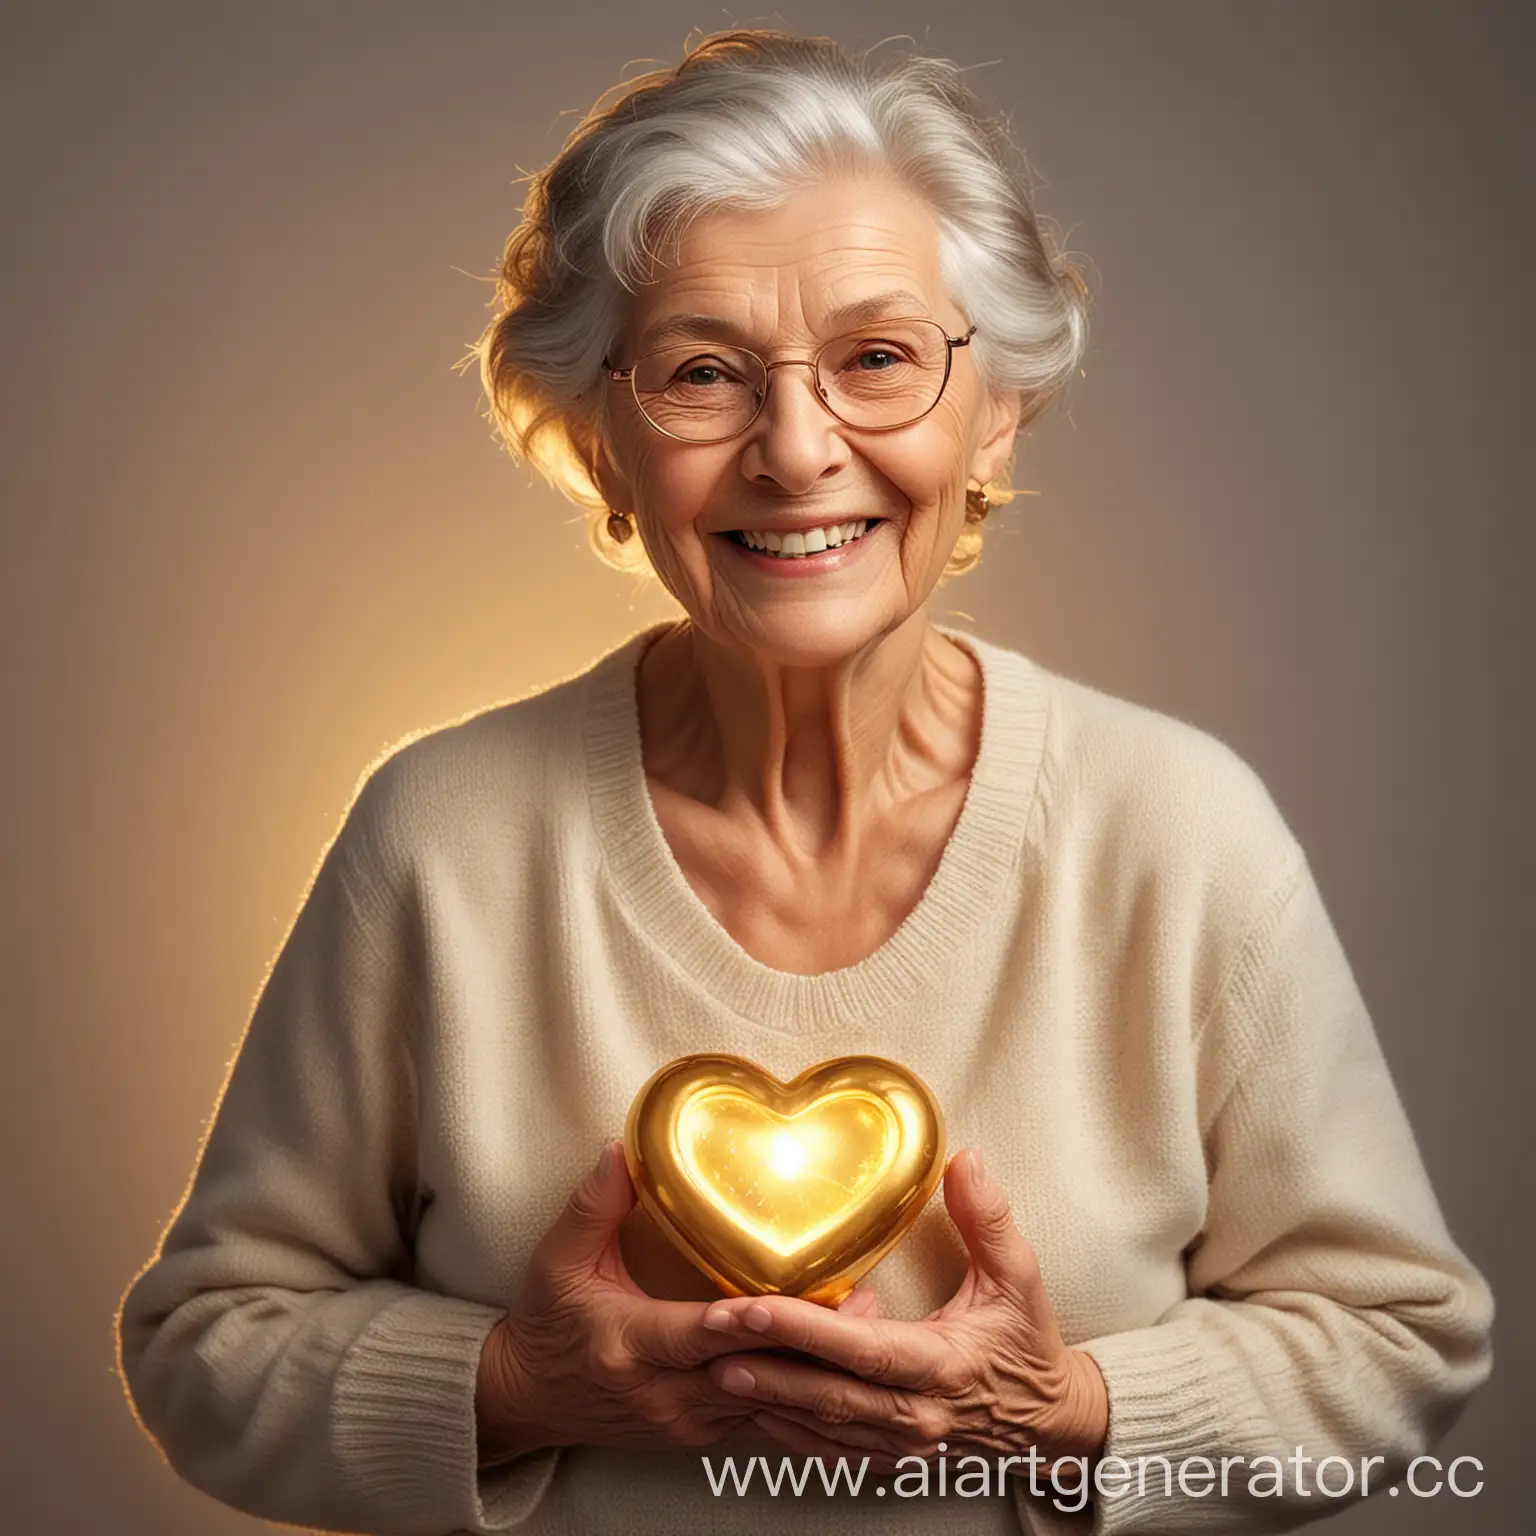 Smiling-Grandmother-with-Glowing-Heart-Portrait-of-Love-and-Happiness